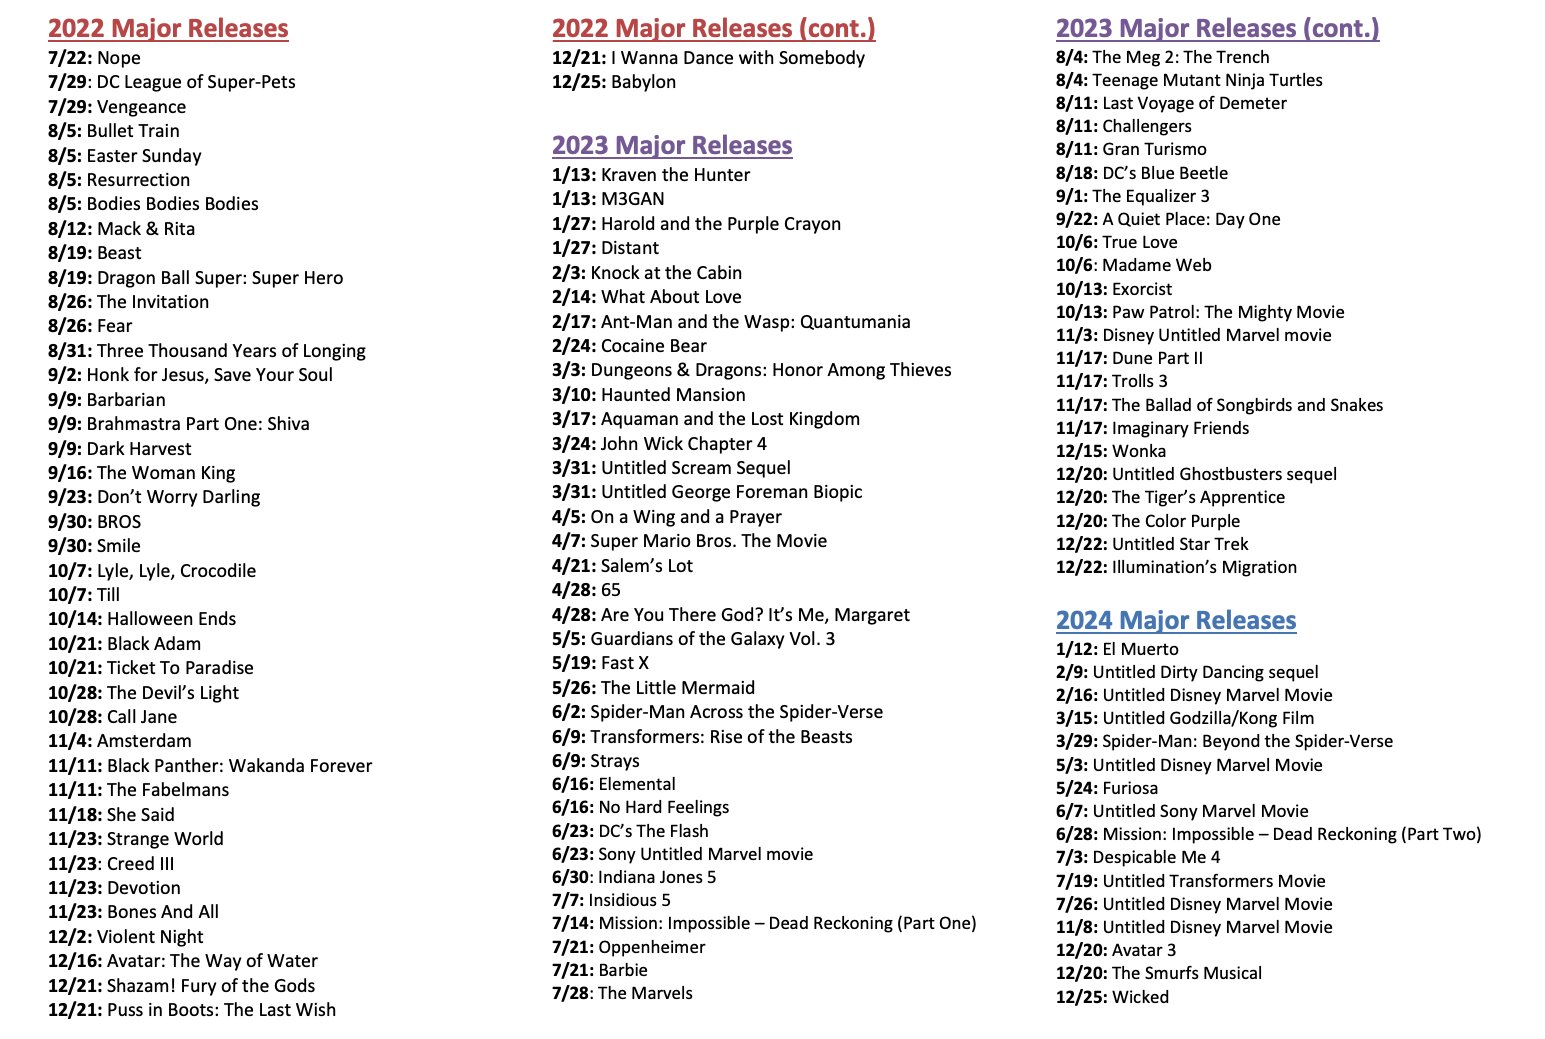 Every major Netflix film release coming in 2024